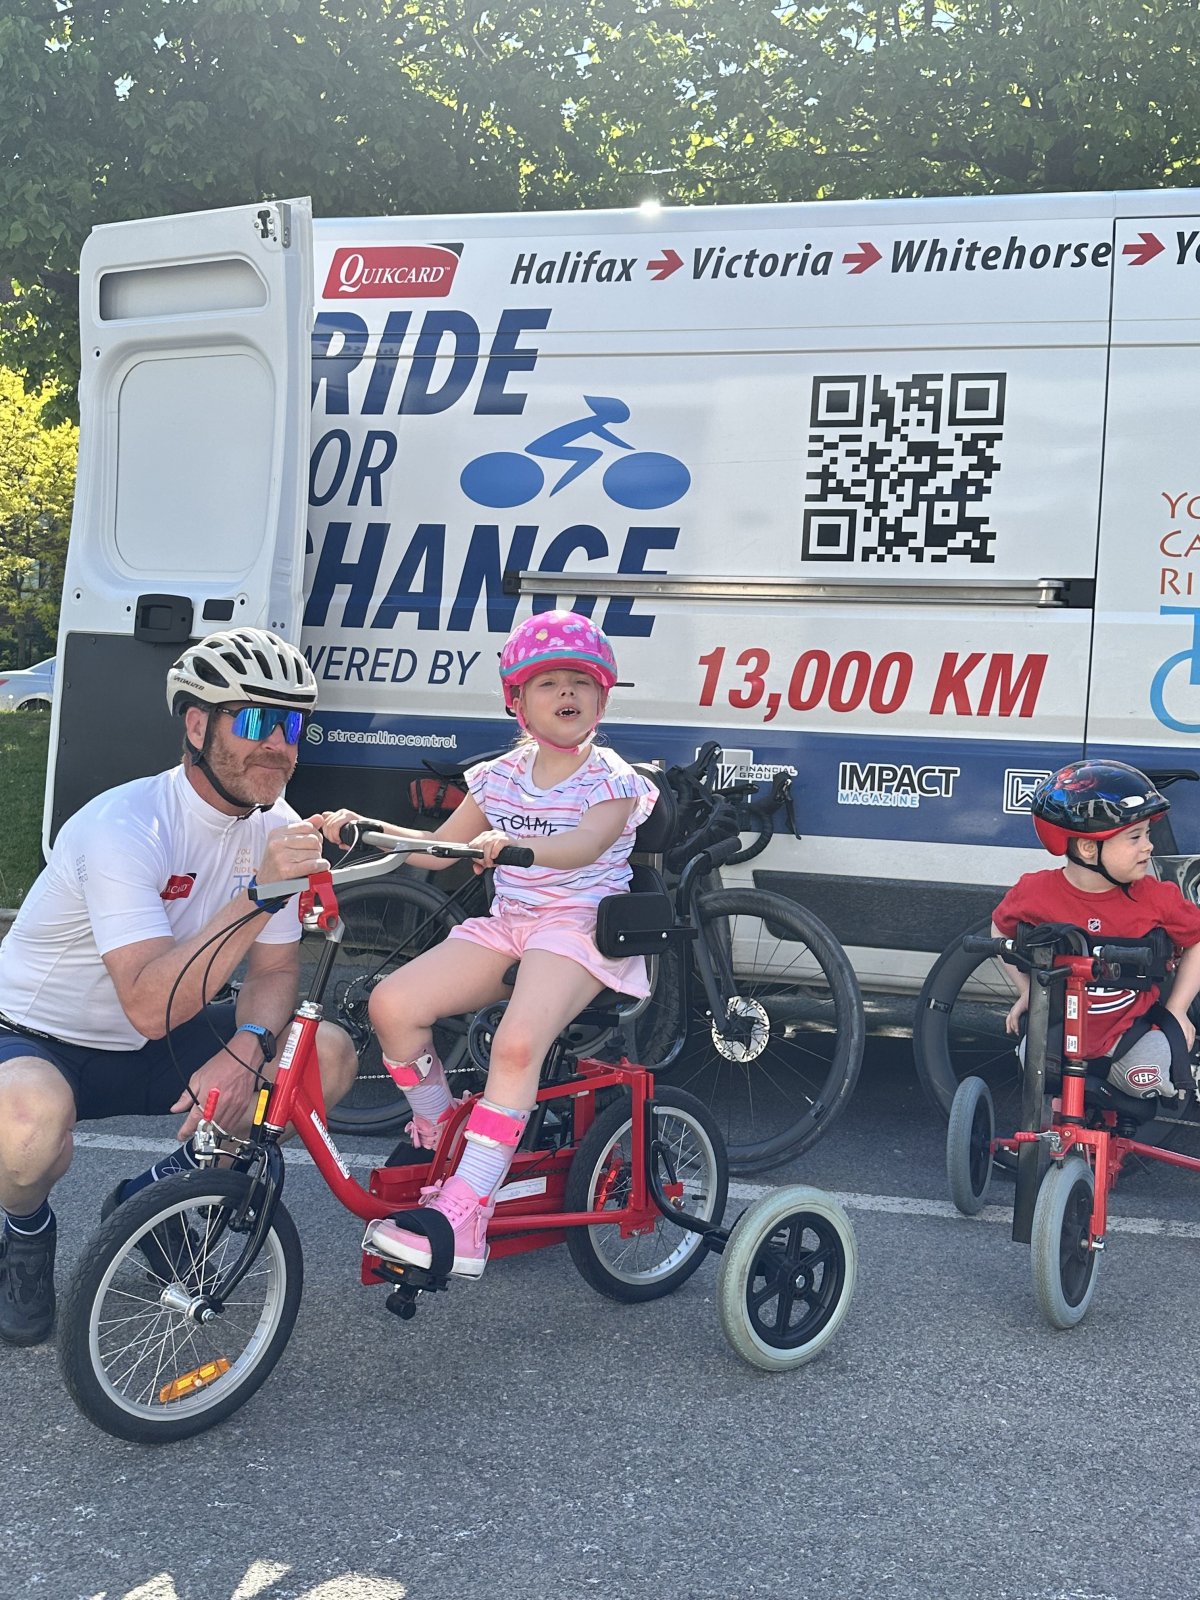 Matthew Devine, 56, from Edmonton, Alberta, is biking across Canada over 13,000 kilometres to raise money for You Can Ride 2, a charity that provides bikes for children with special needs. 